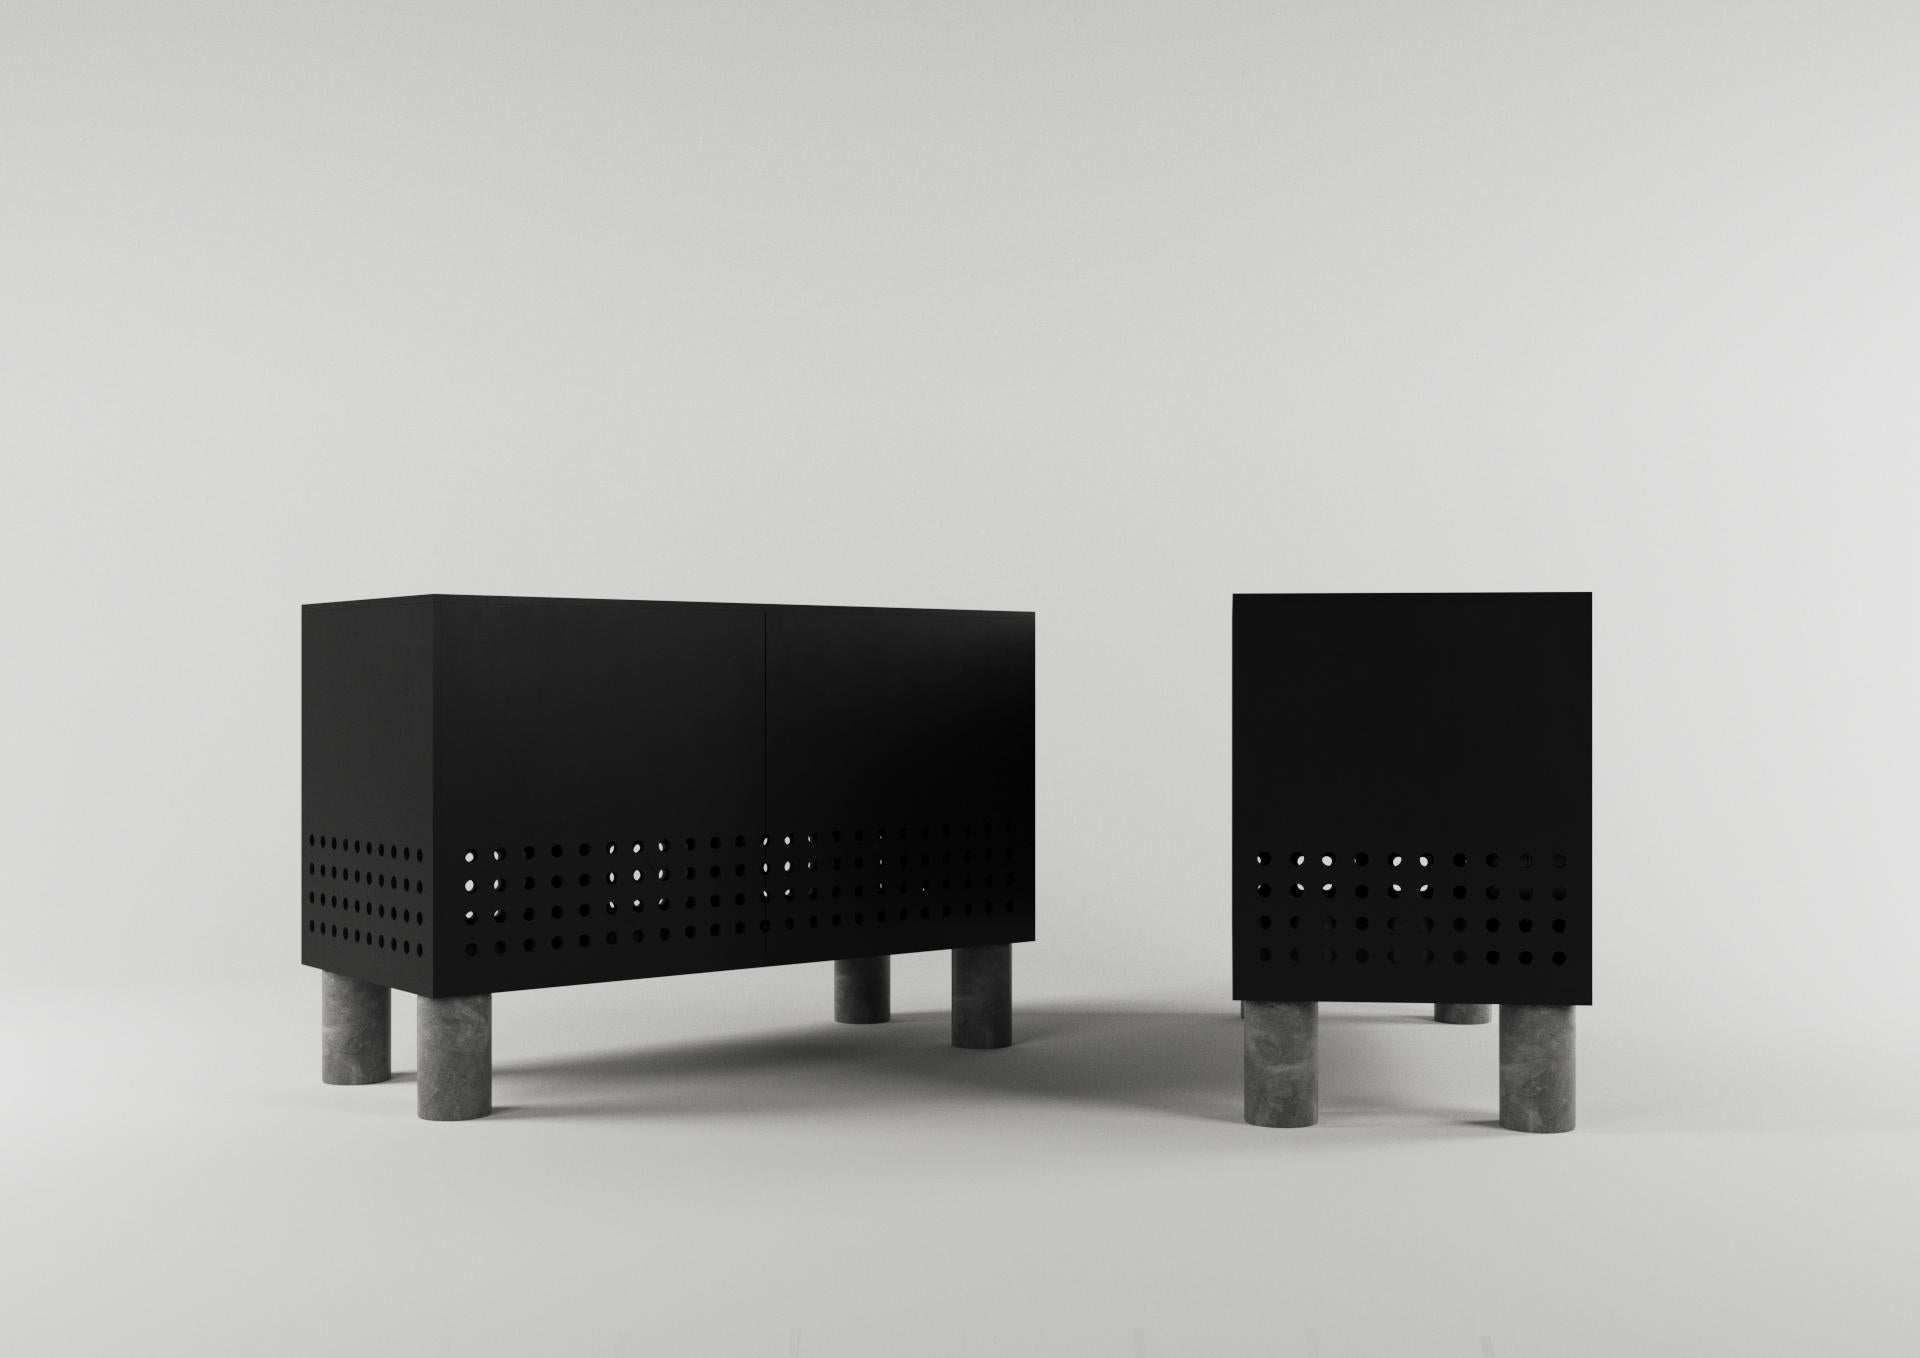 The simple shape of the object finished in black color, does not prevent it from becoming a mysterious black box owing to the perforation of its panels and playful legs. Laconic and refined proportionality impart exquisiteness to the simple form and